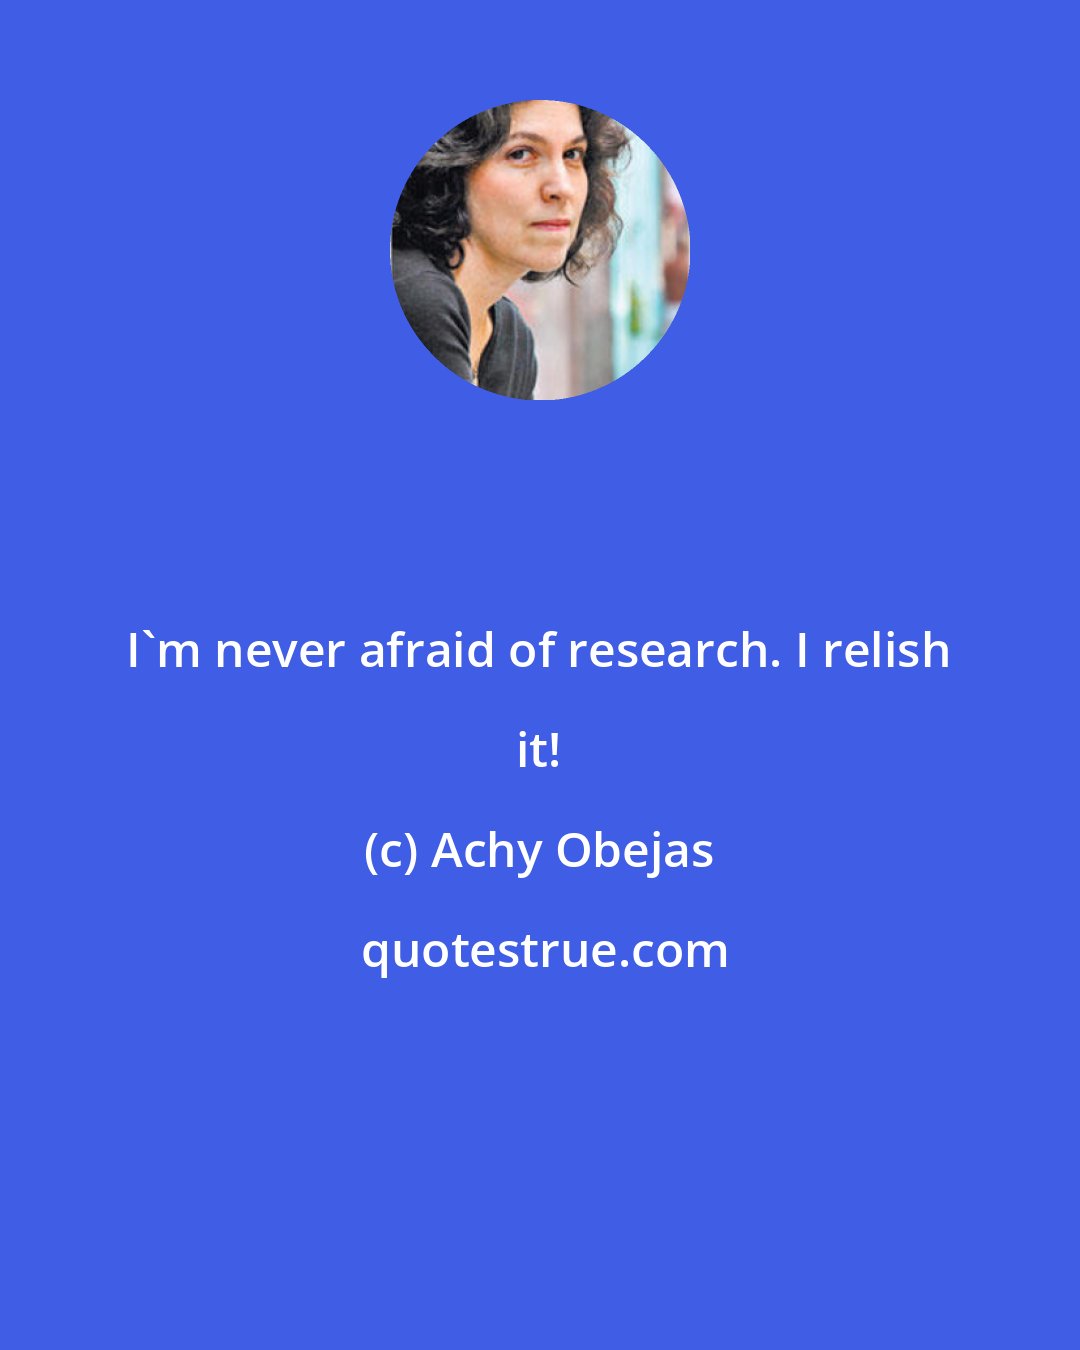 Achy Obejas: I'm never afraid of research. I relish it!